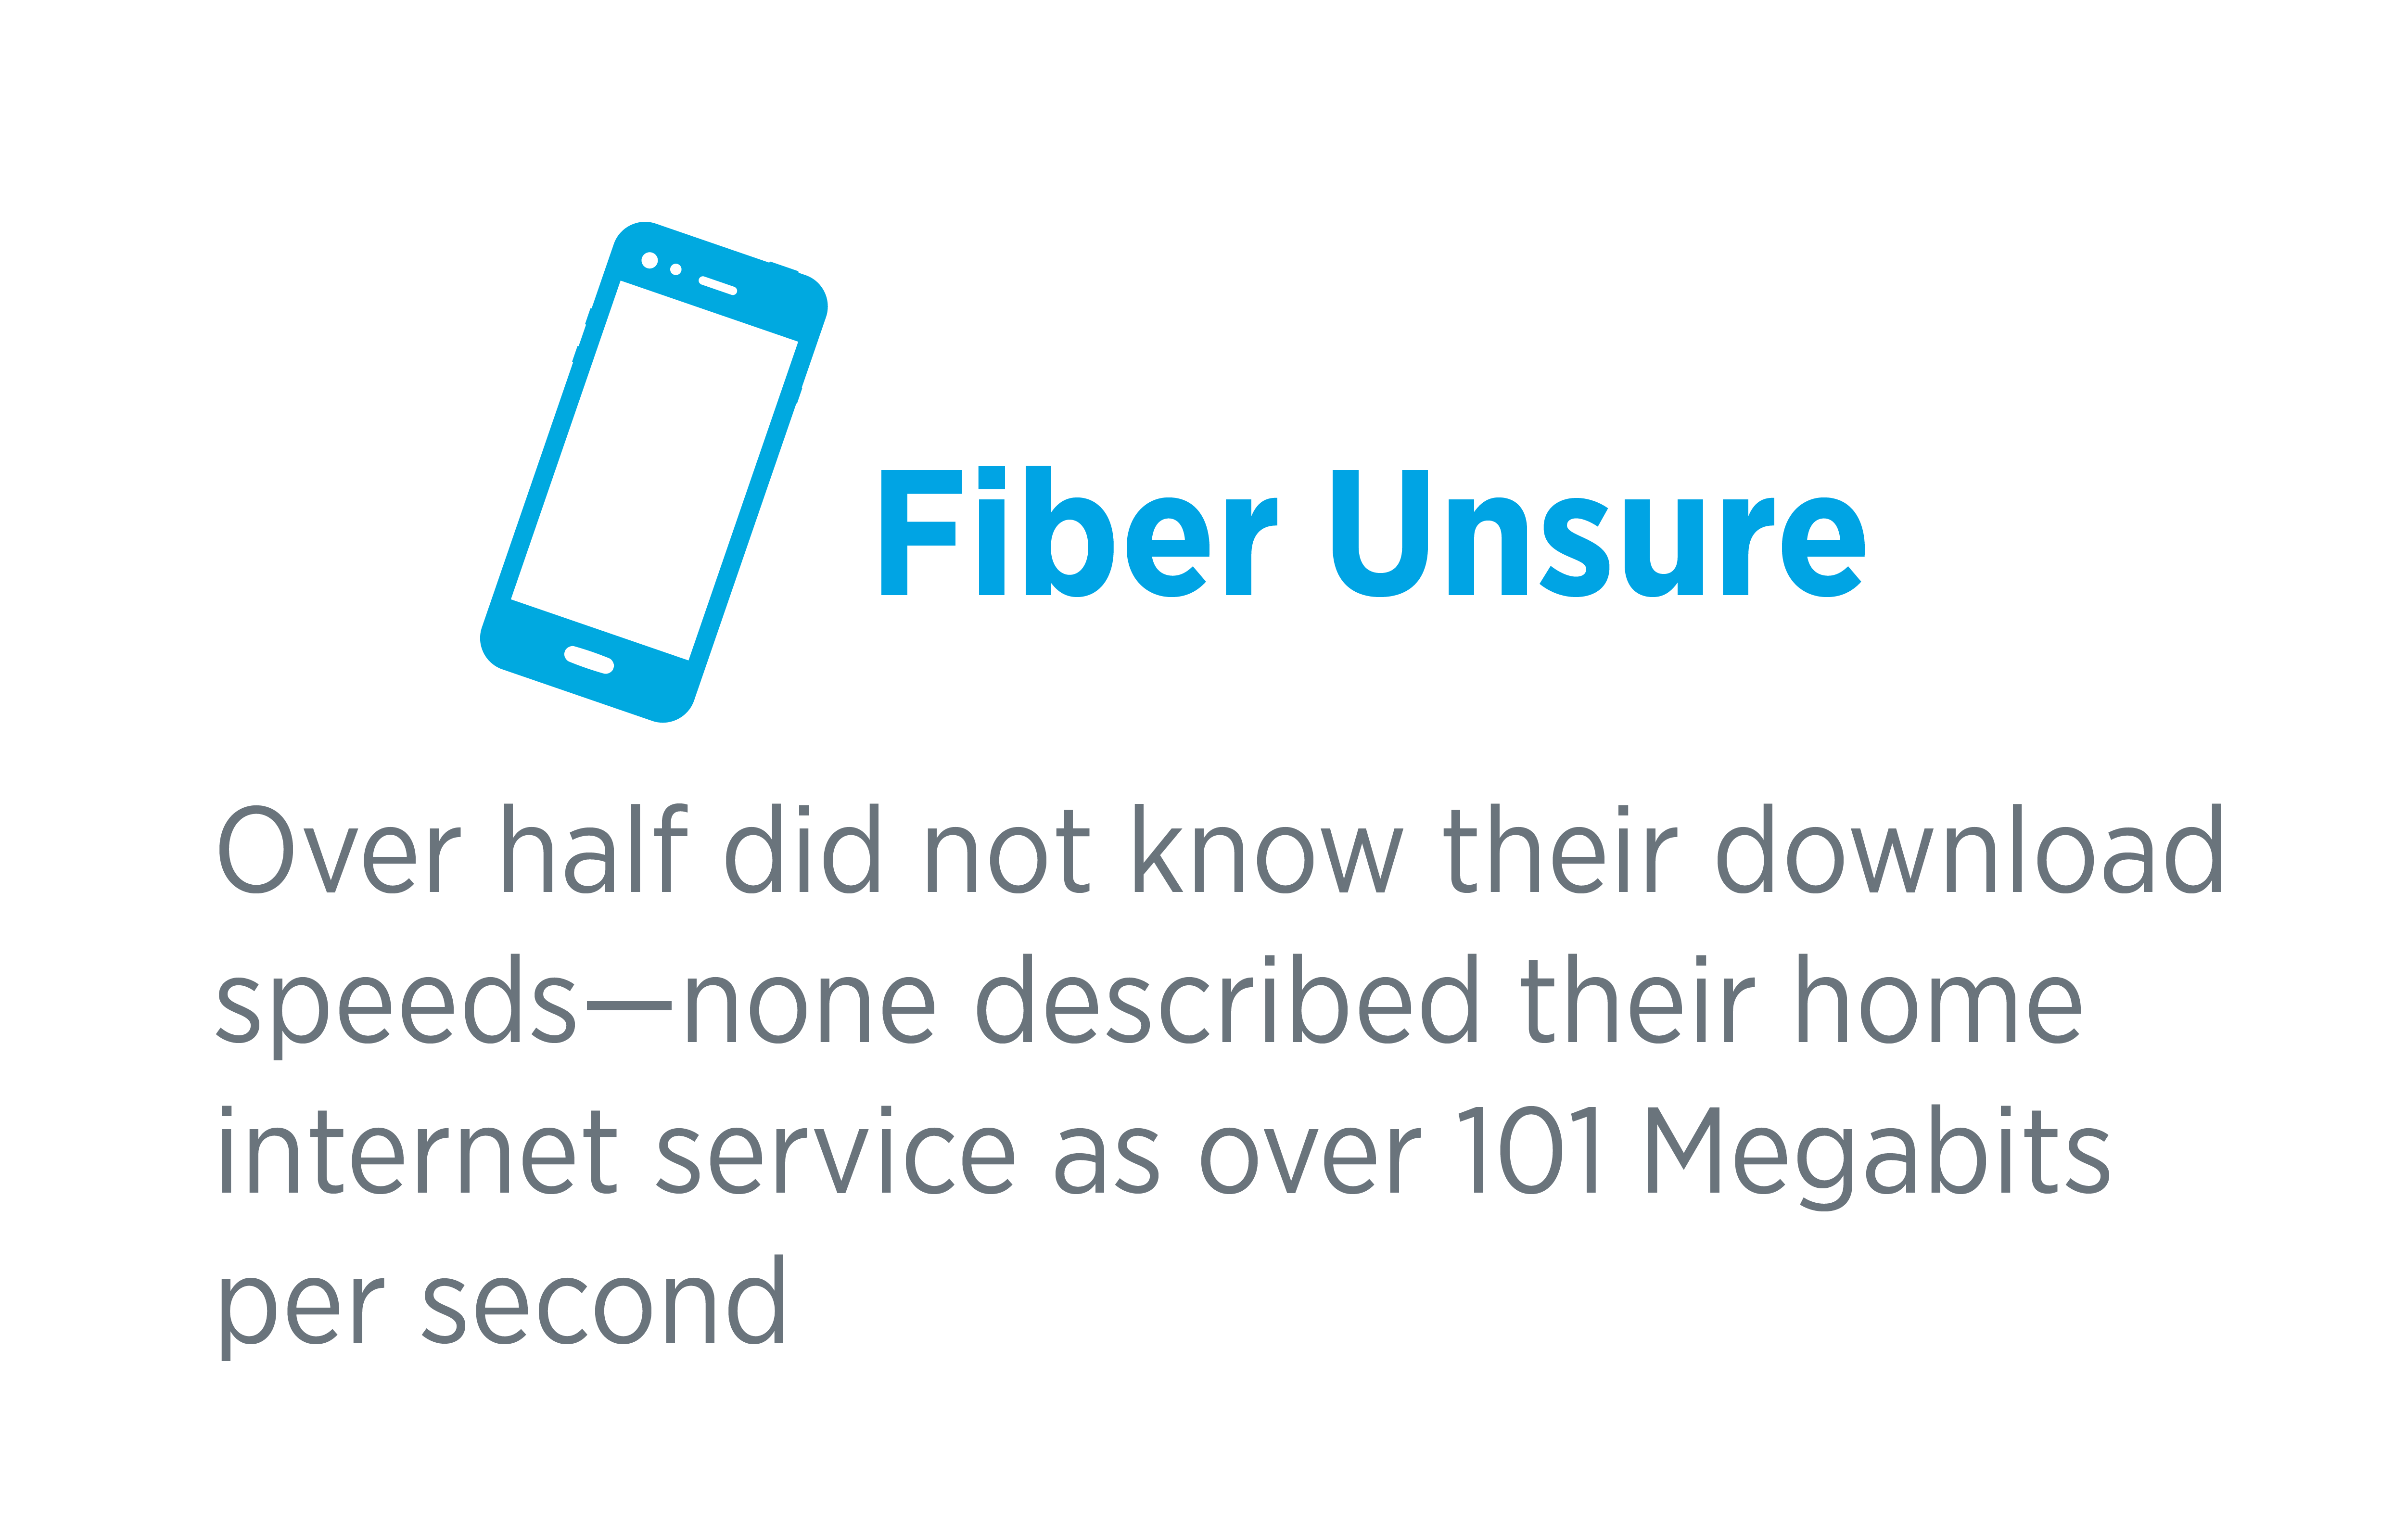 over half did not know their download speeds--none described their home internet service as over 101 megabits per second